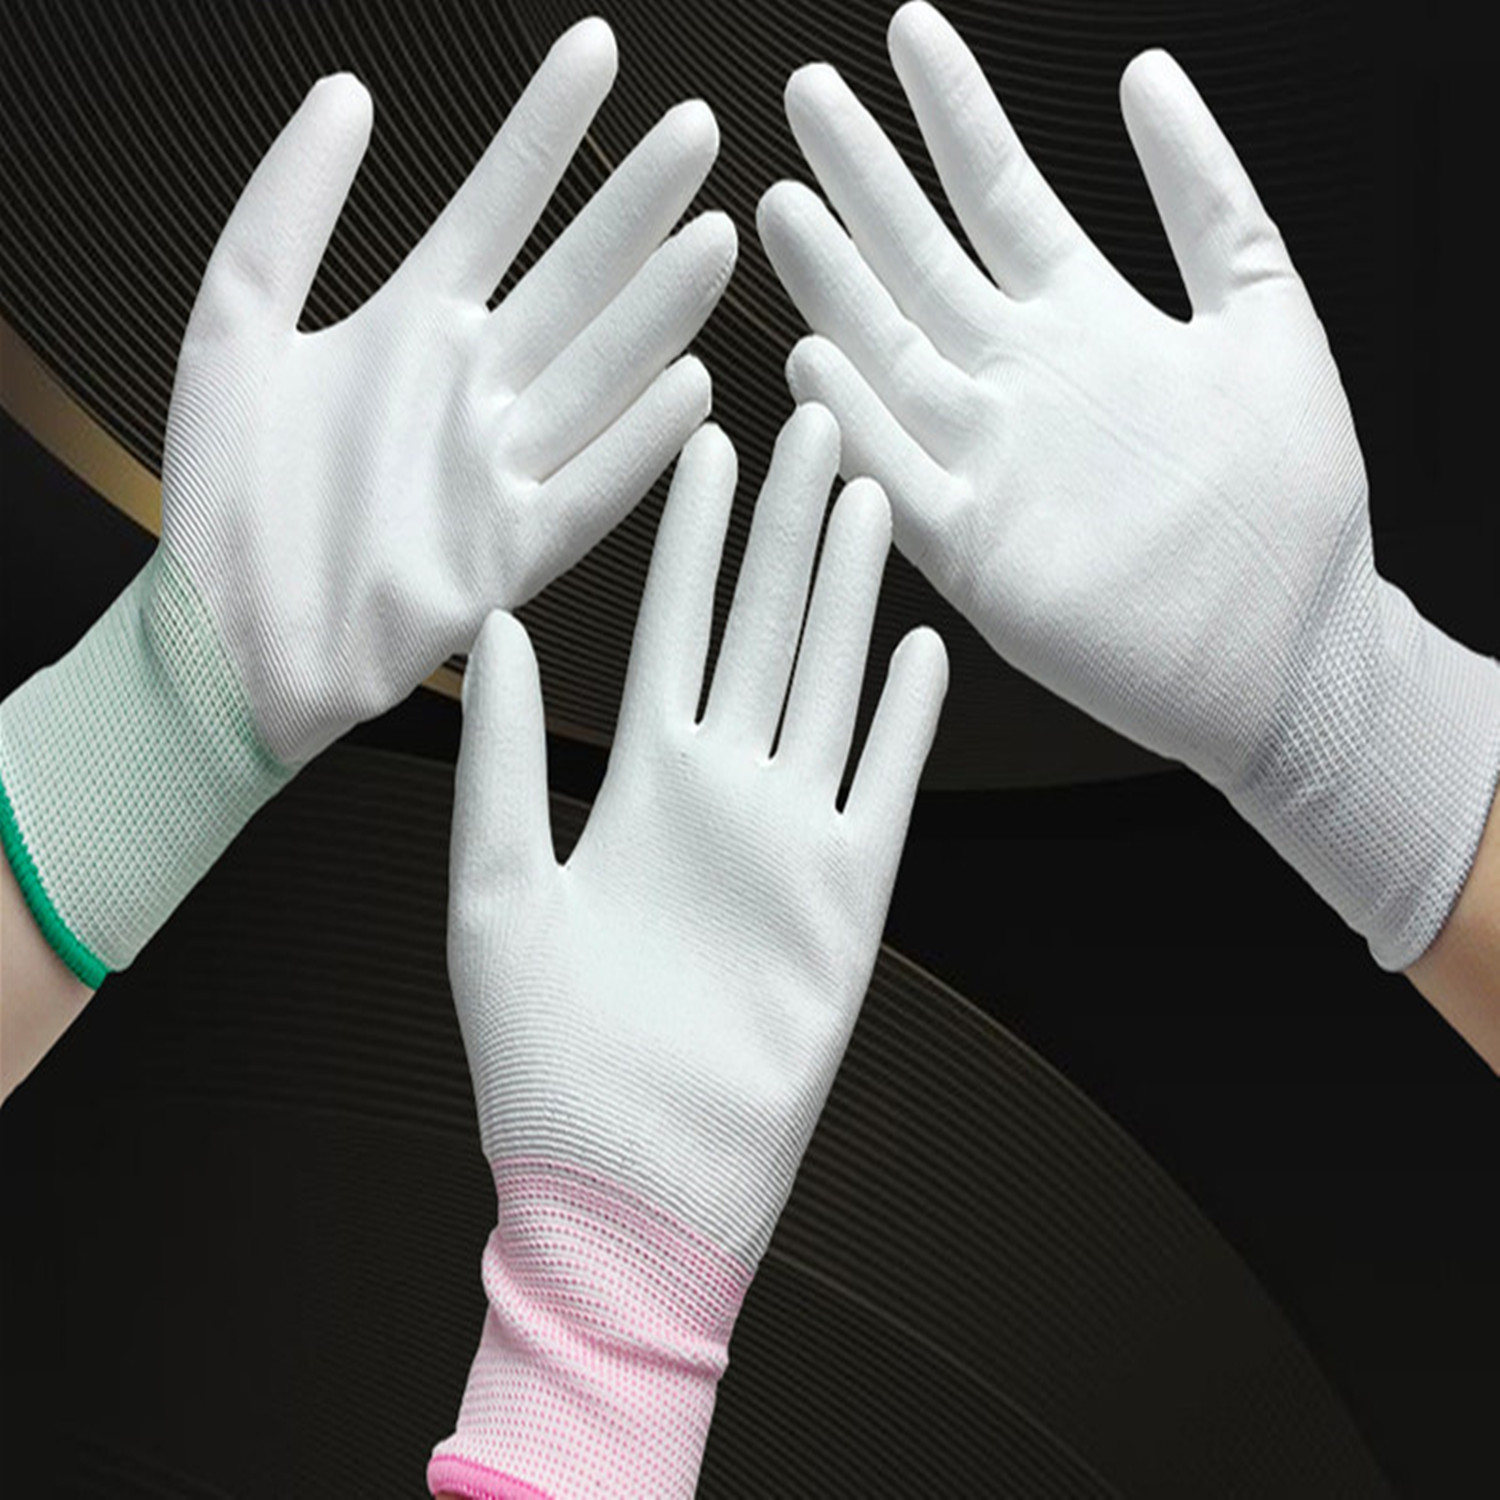 Pu white coated gloves wear-resistant anti-static gloves